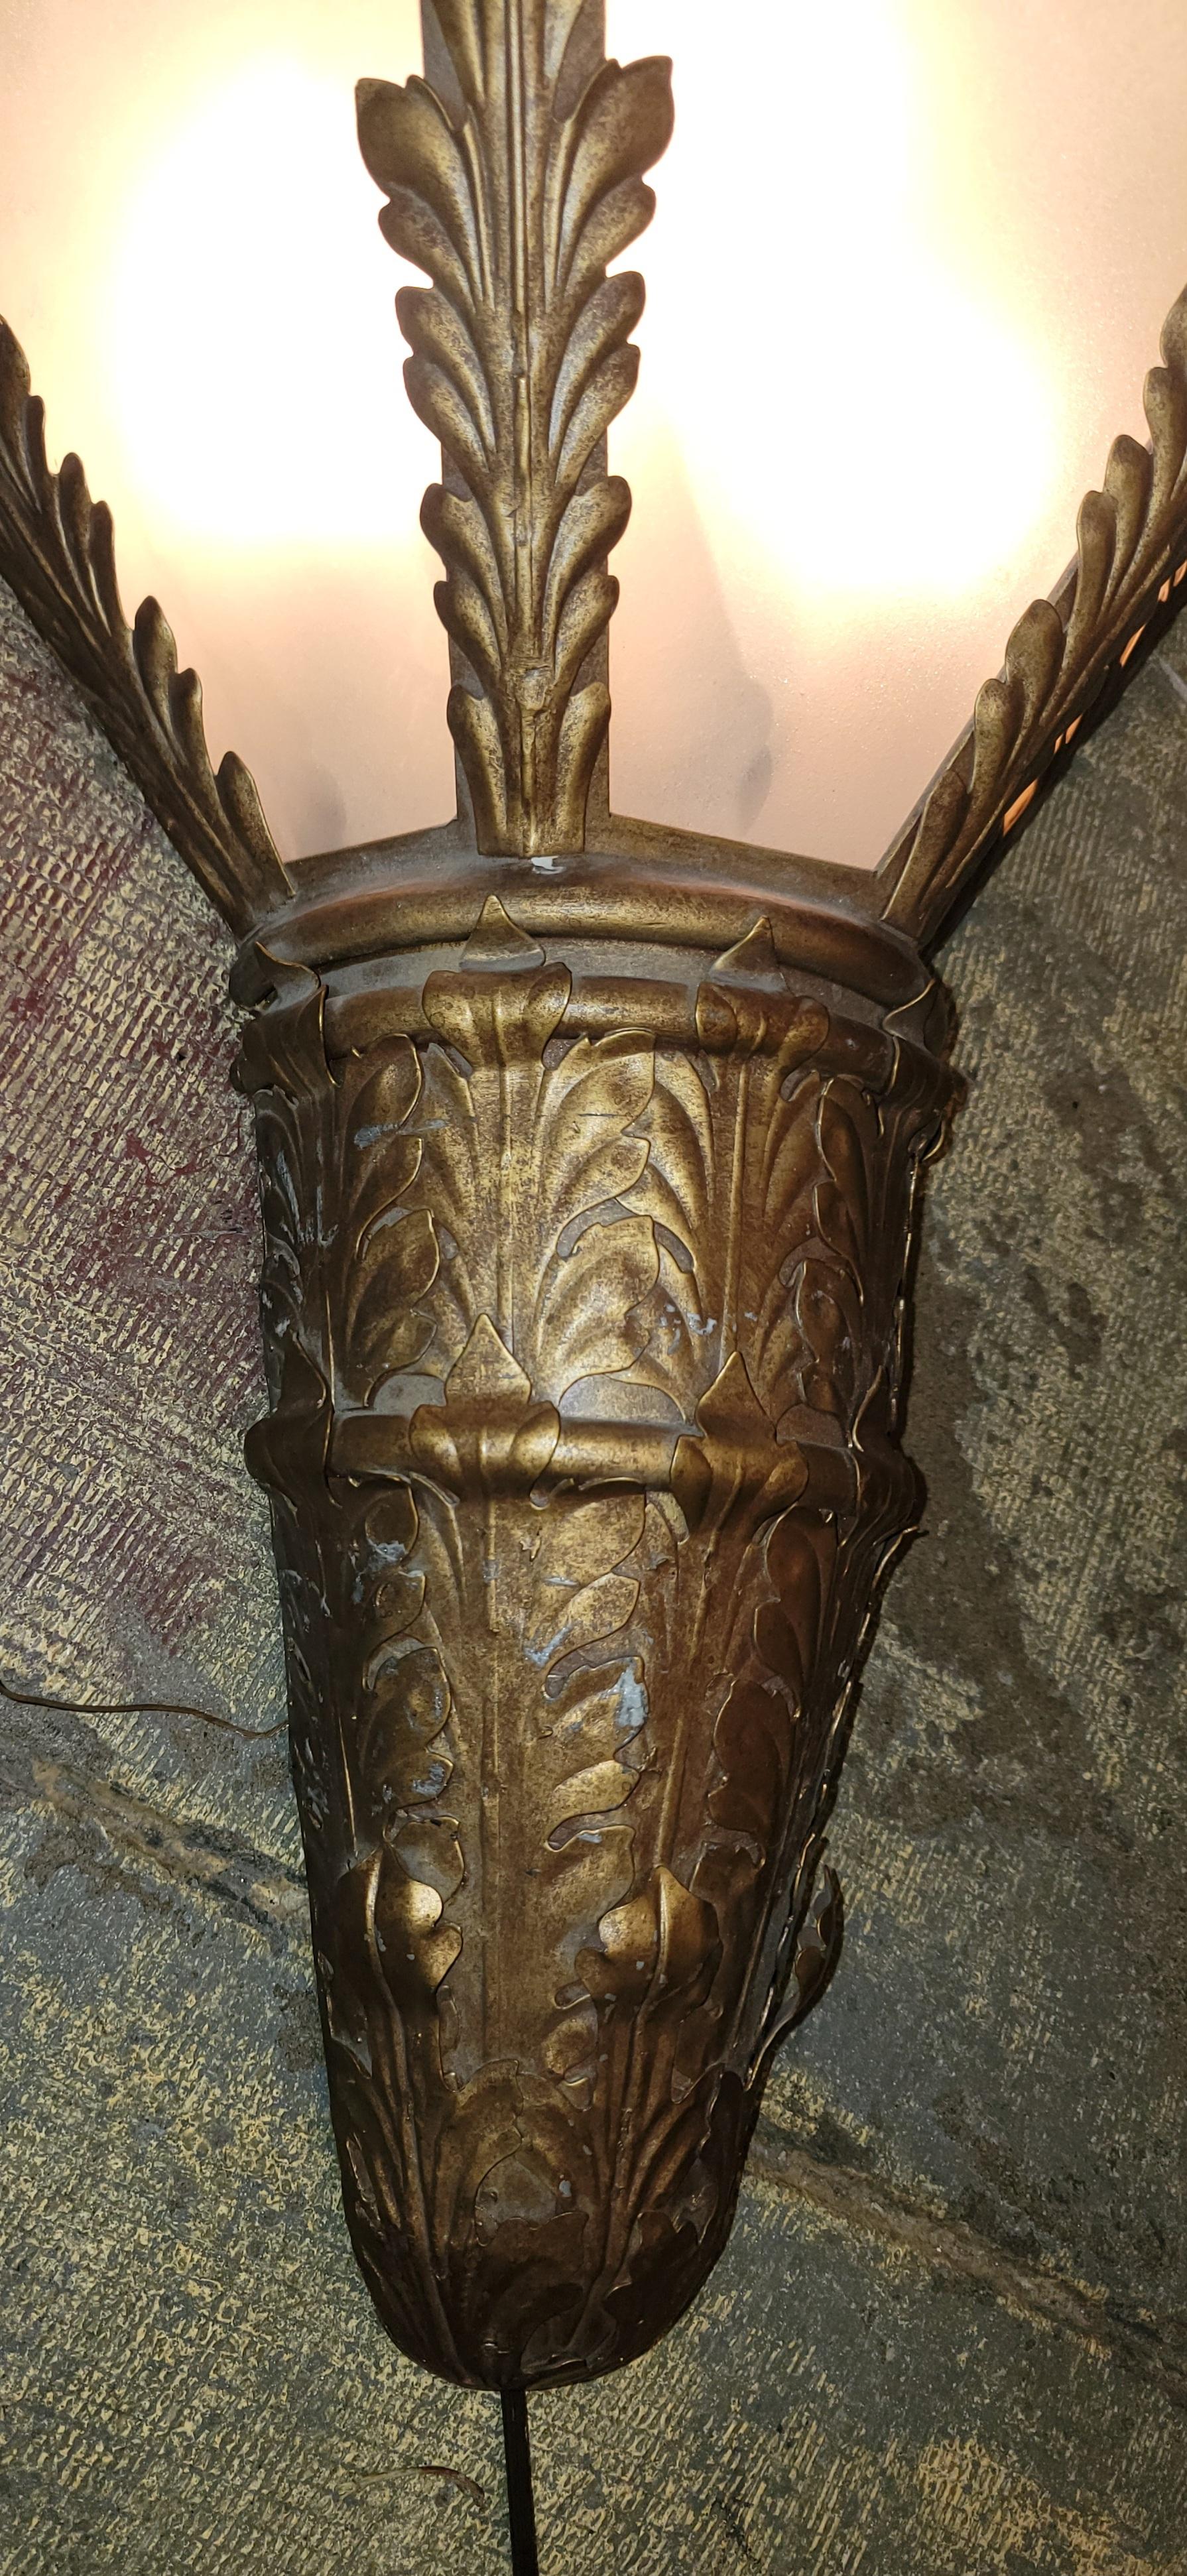 Pair of Metal Sconces From The Century Plaza Hotel In Good Condition For Sale In Pasadena, CA